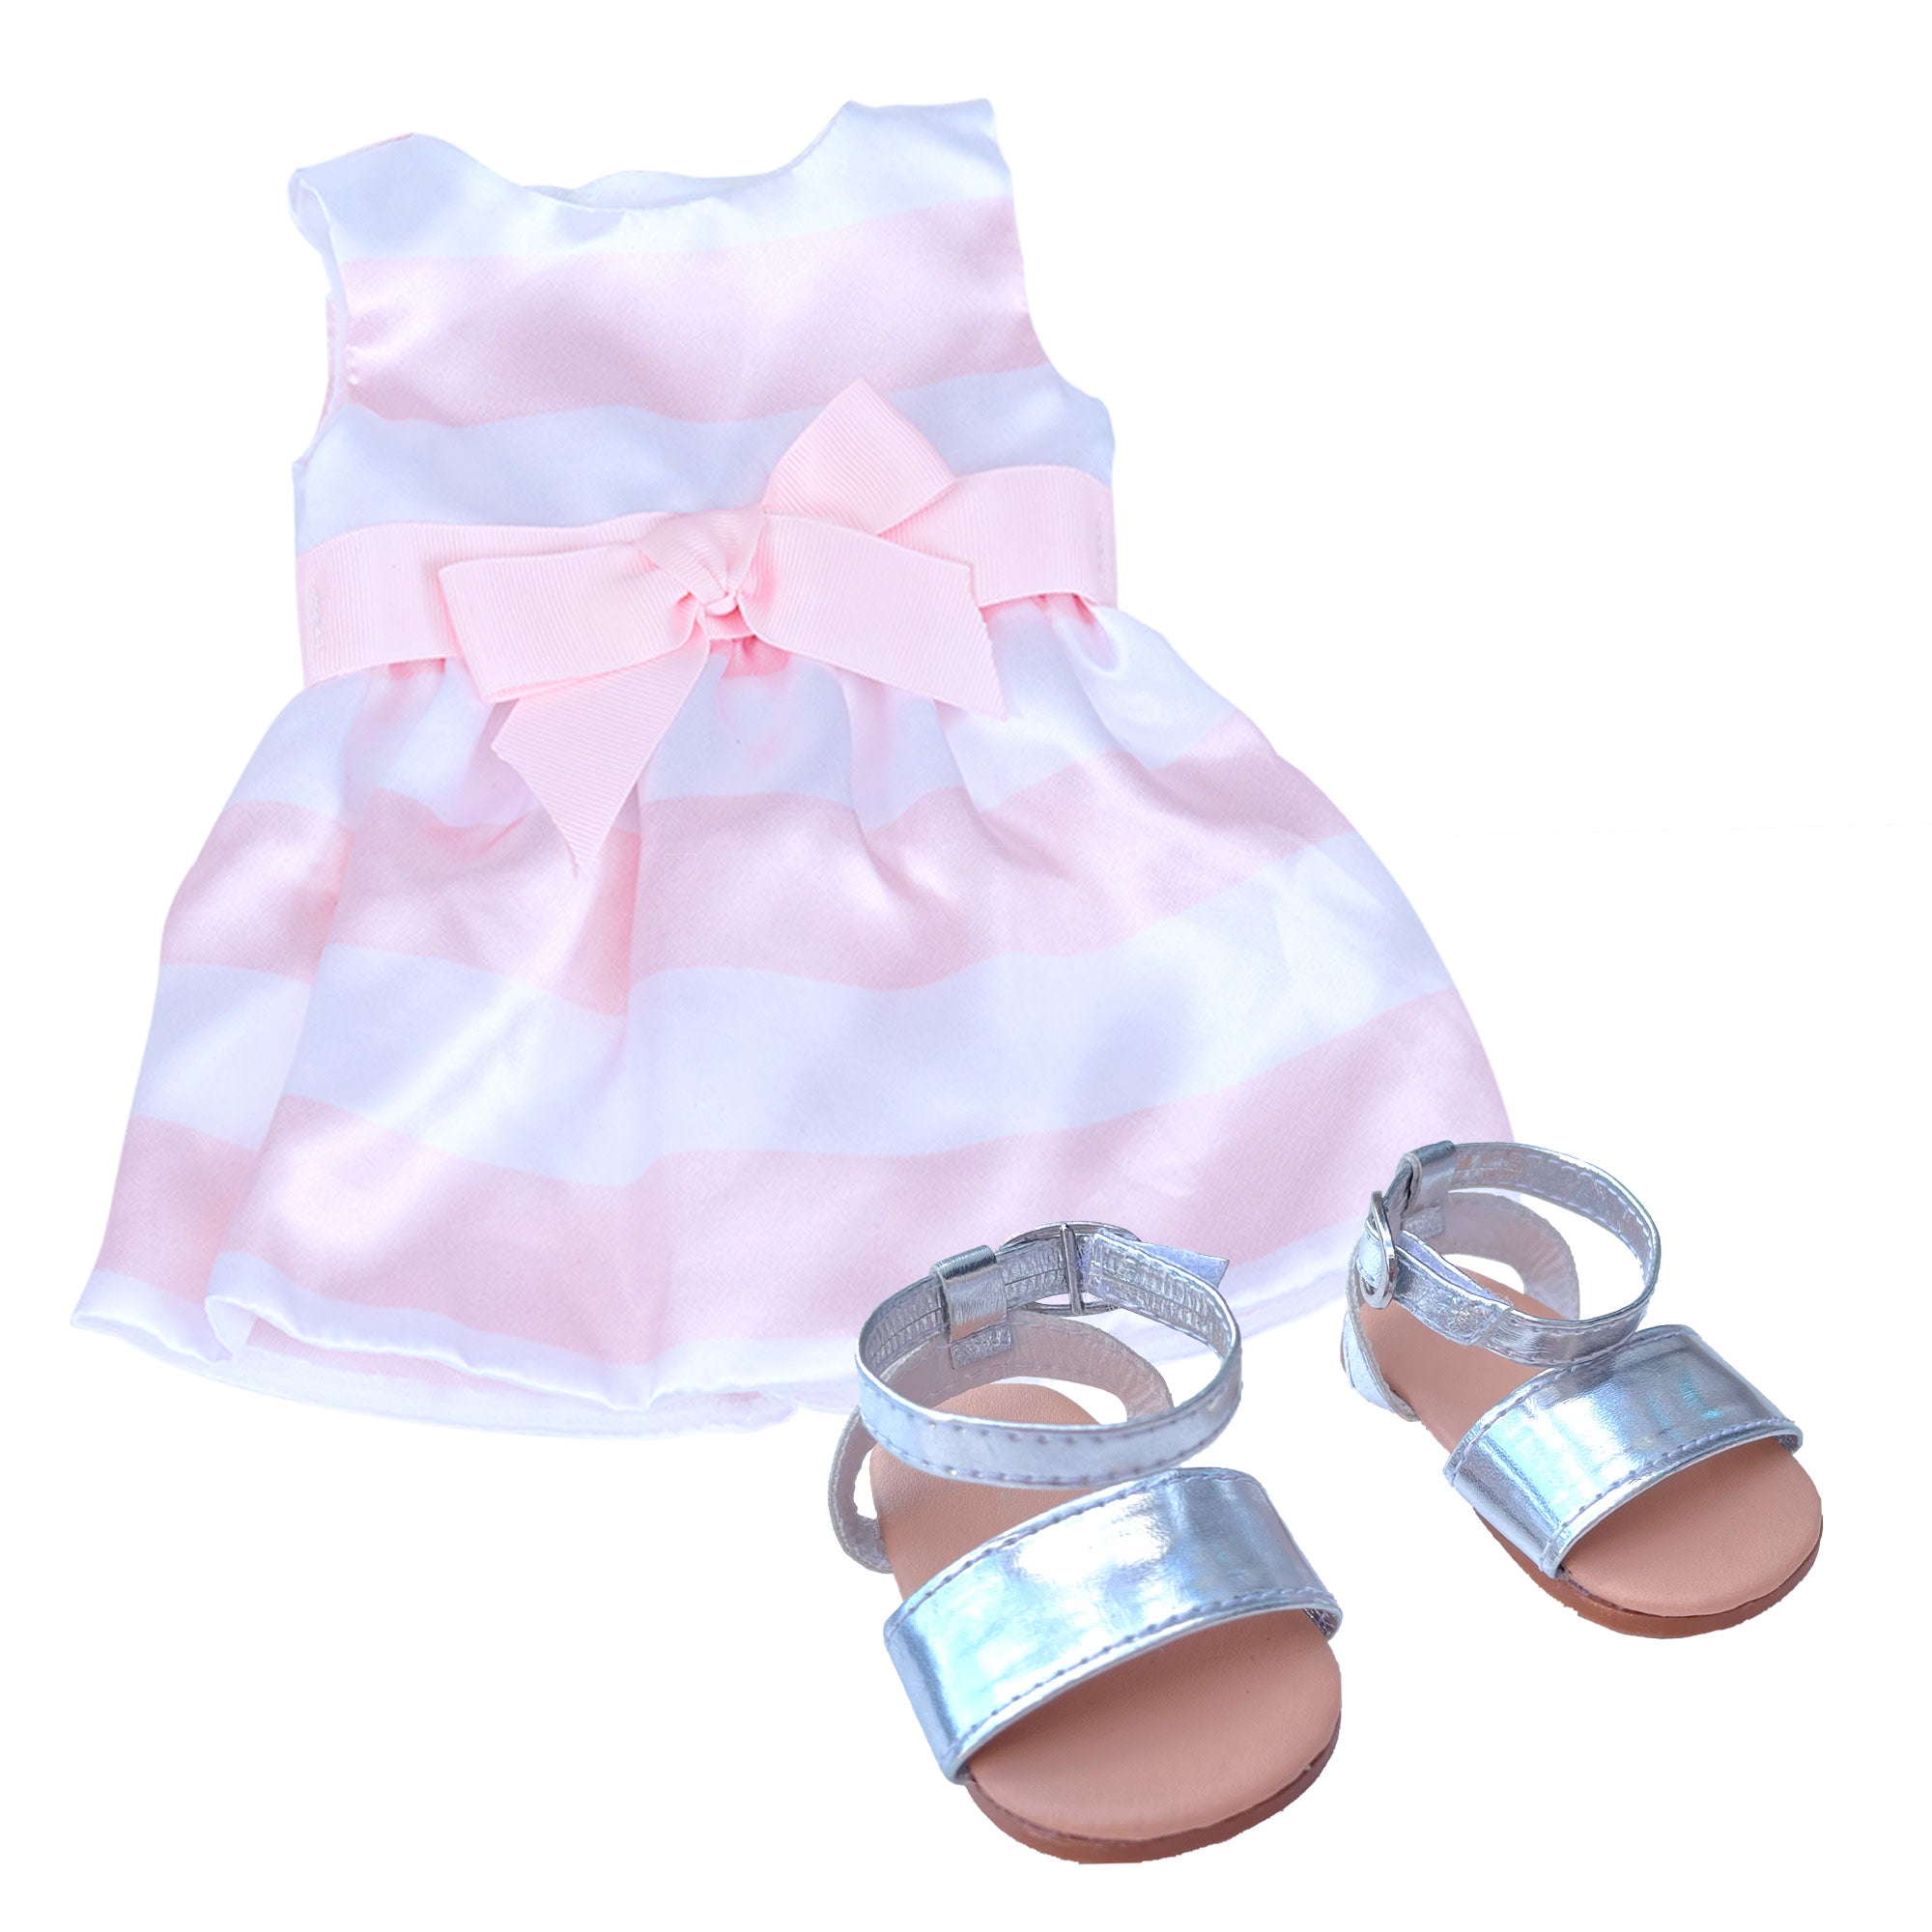 Sophia's Stripe Satin Party Dress and Ankle Strap Sandals for 18" Dolls, Pink/White